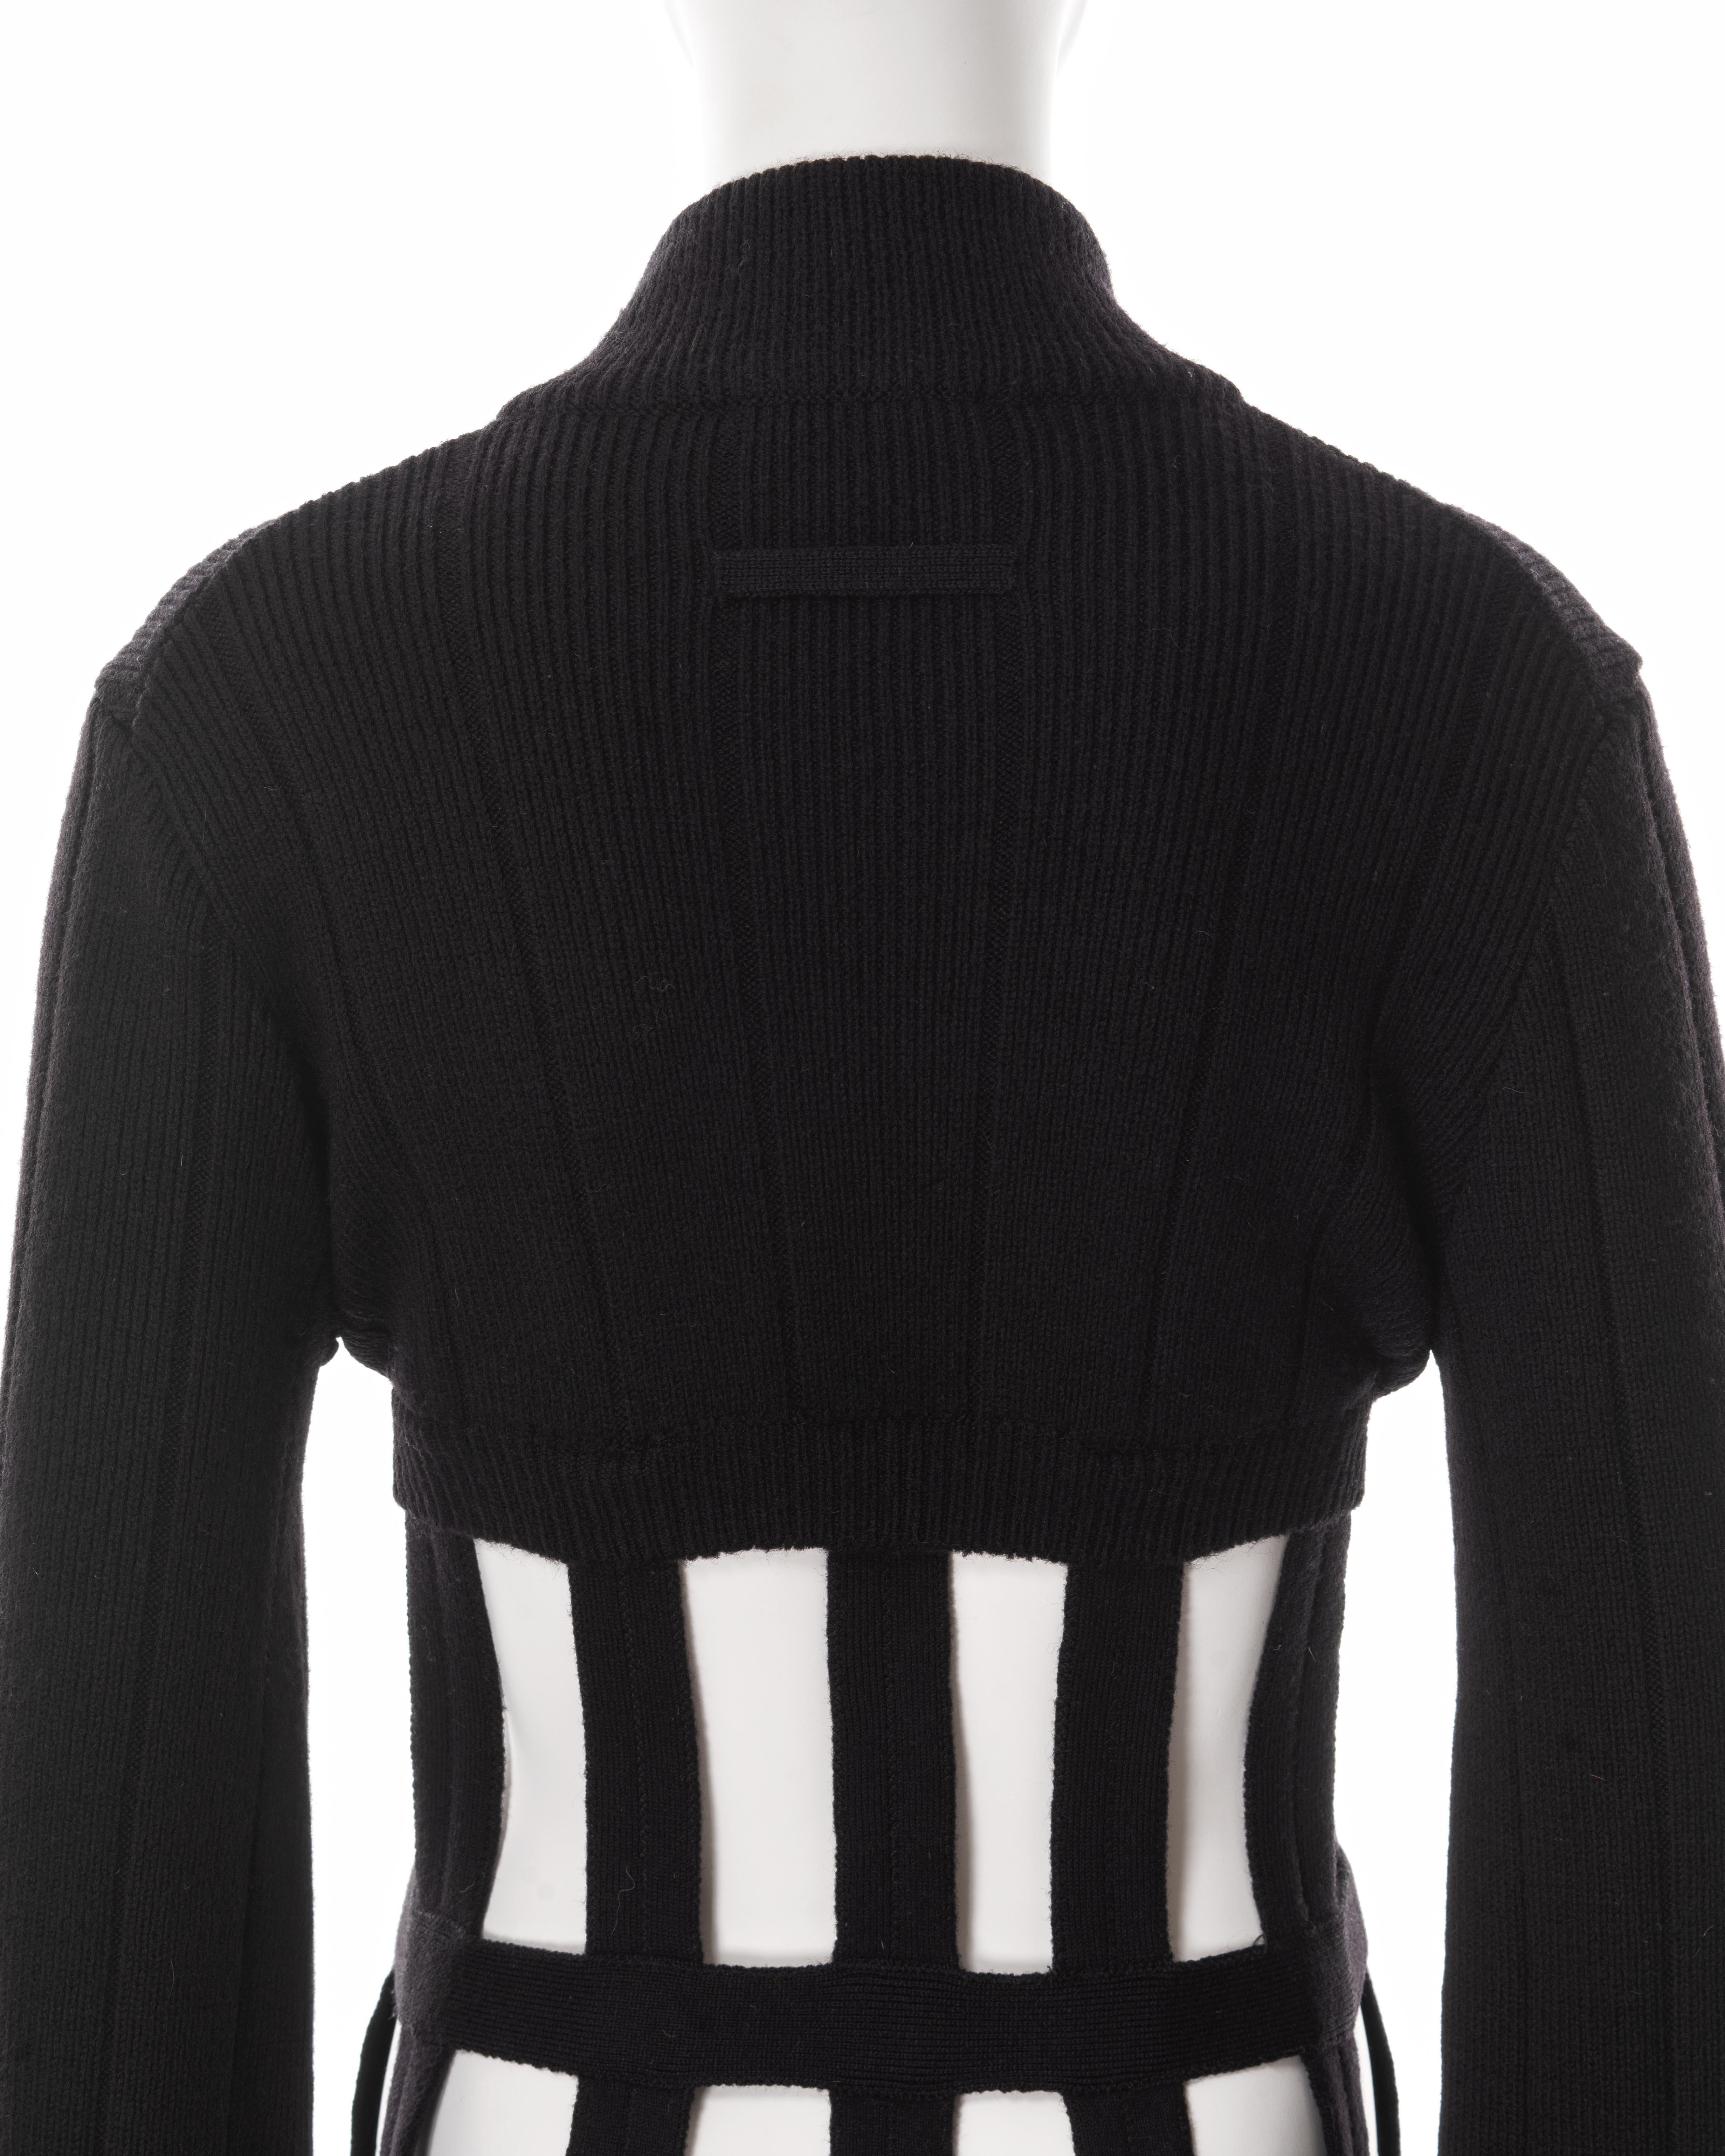 Jean Paul Gaultier black knitted wool caged corset sweater dress, fw 1989 For Sale 6